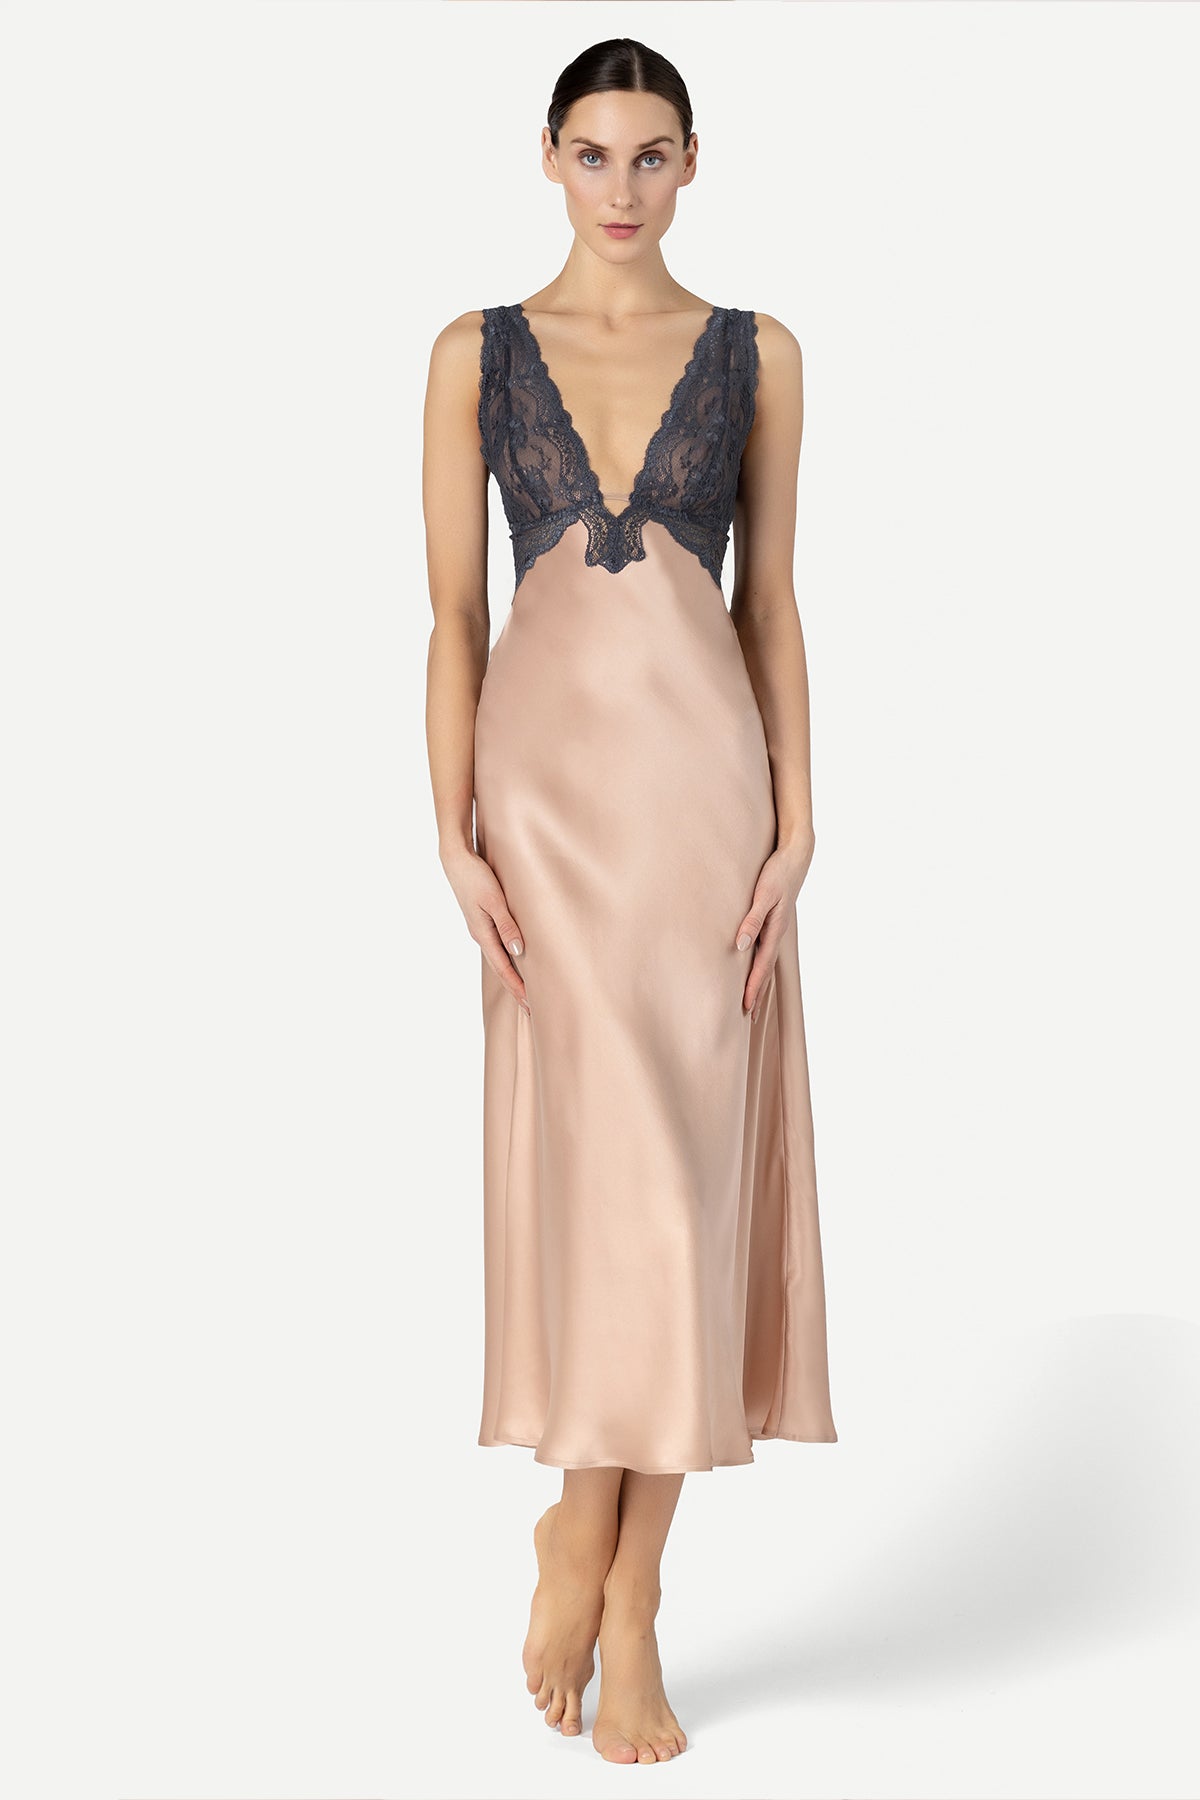 Viva Sensual Bust-Support Long Silk Gown Long Gown NK iMODE Rose Gold Pink XS